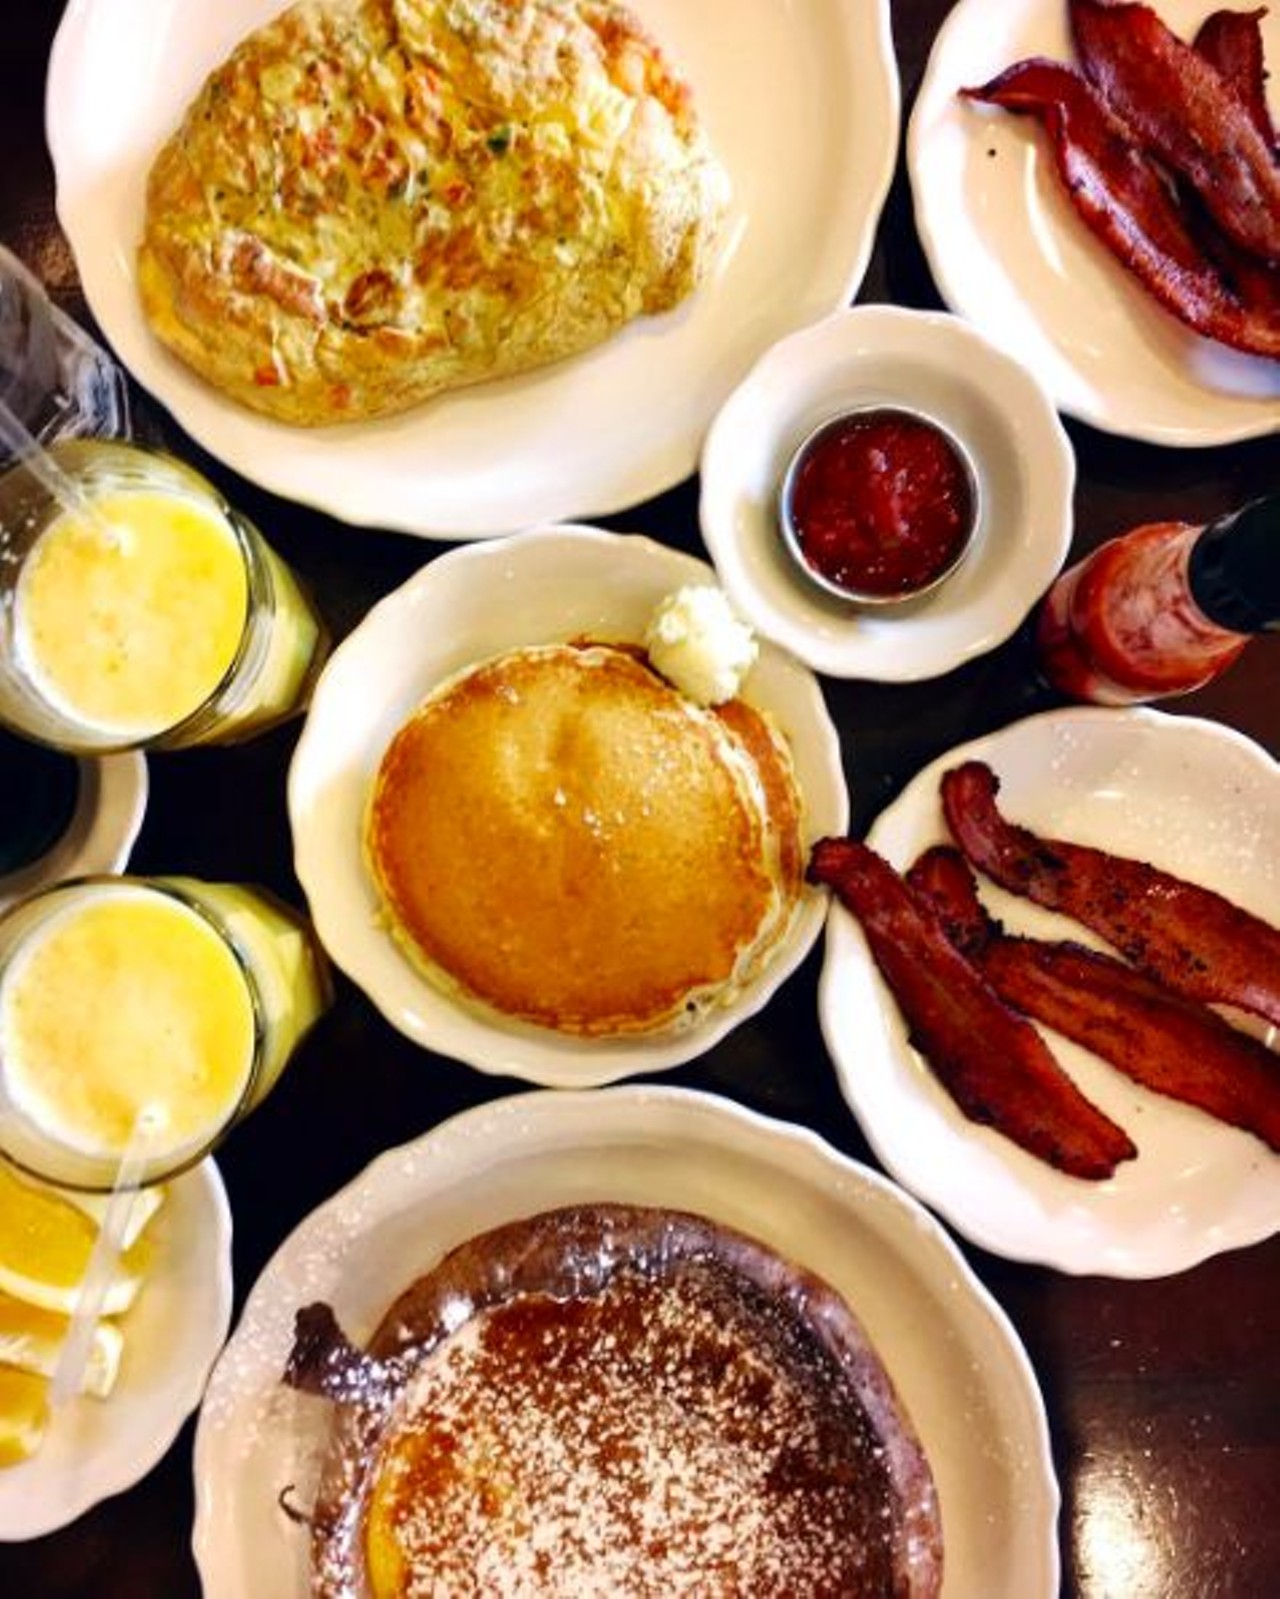 Original Pancake House
Birmingham: 33703 Woodward Ave.
Grosse Pointe: 20273 Mack Ave.
OK, maybe we&#146;re pointing out the obvious, but who would we be if we didn&#146;t sing the praises of this OG breakfast spot? Come Sunday morning if you&#146;re willing to wait, or stop by on a weeknight just because you can (the Dutch baby tastes just as good at dinnertime, trust us). No matter which location you visit, you&#146;re bound to leave this metro Detroit staple happier than you arrived.
Photo via IG user @tablefortwodetroit